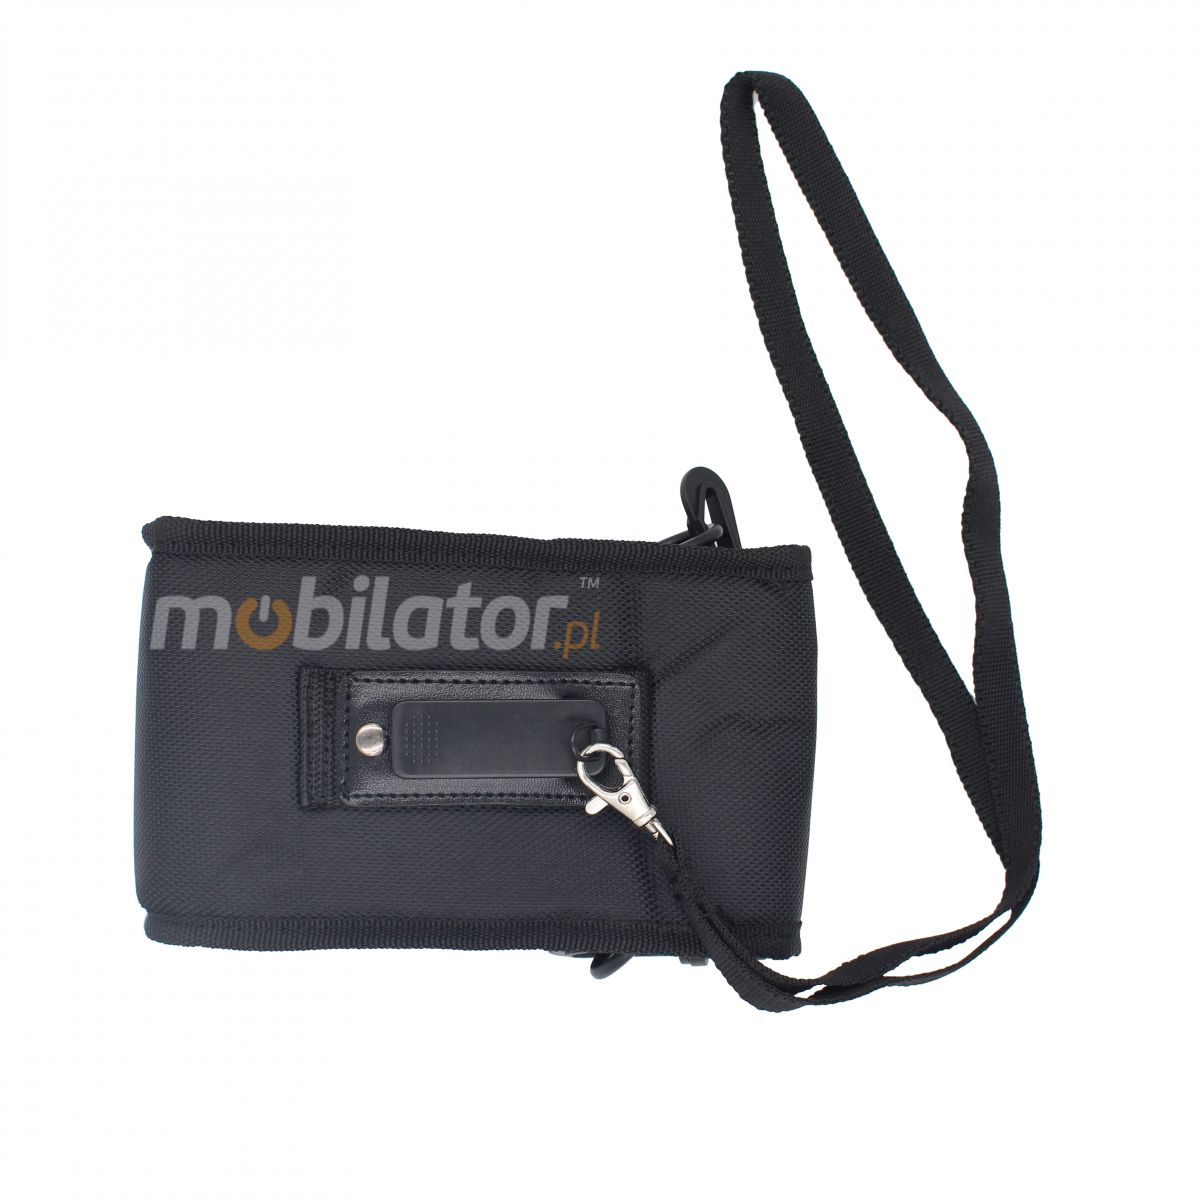 MobiPad C50 v.7.1 Industrial, mobile, fall-proof data collector with IP6.5 HF RFID and LF134.2 KHz RFID standards 